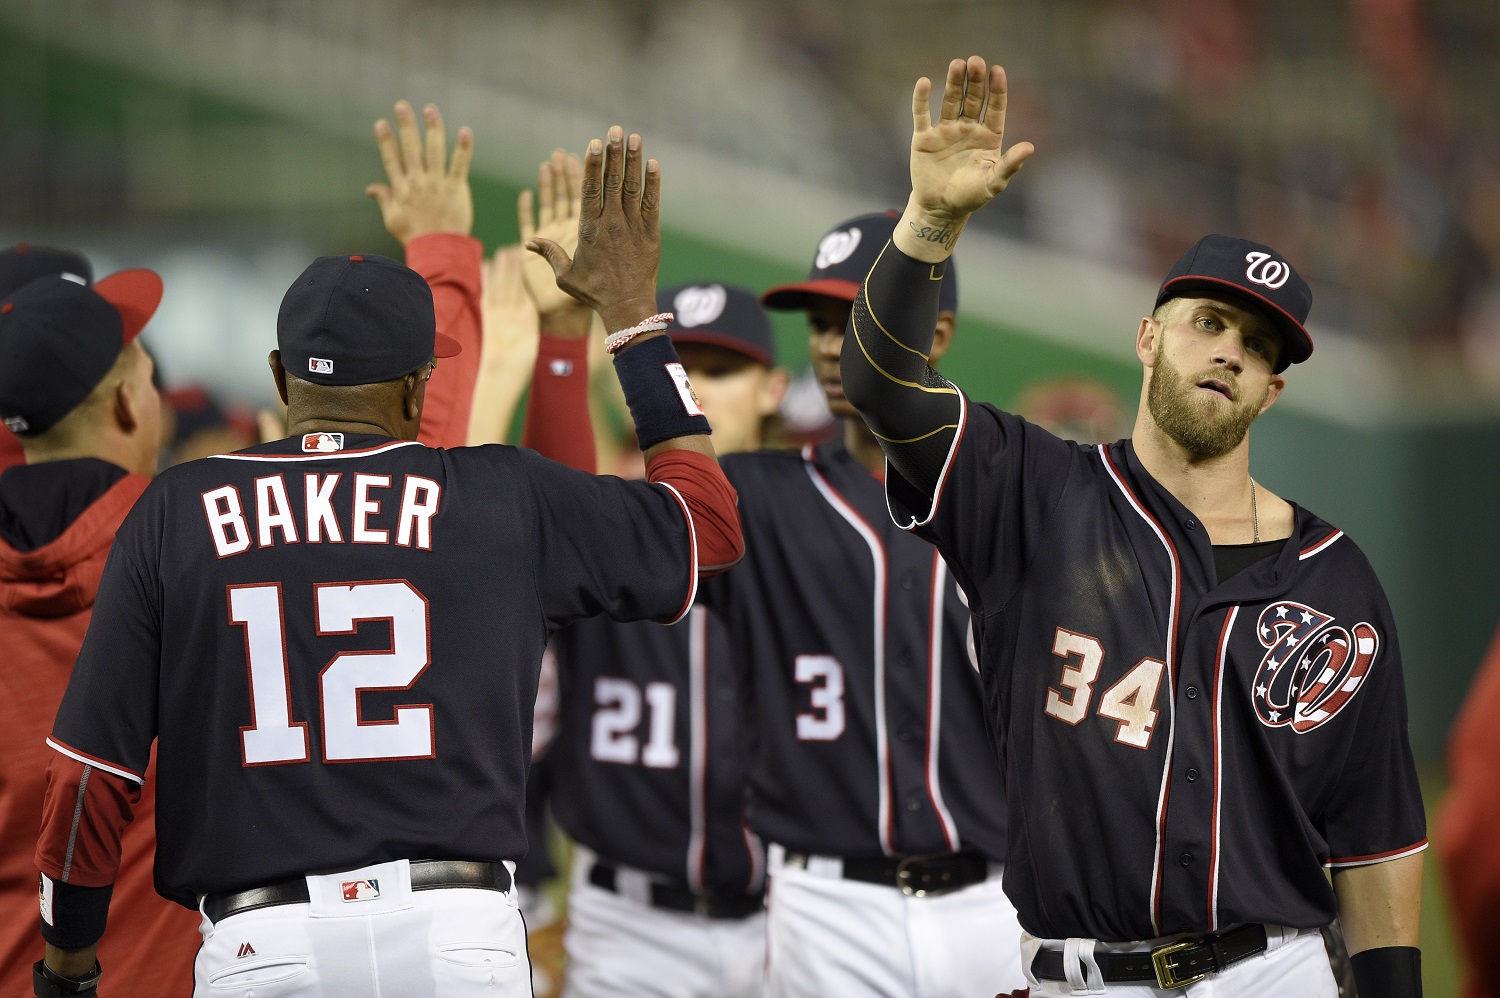 Washington Nationals' Bryce Harper (34), manager Dusty Baker (12) and others celebrate win over the Minnesota Twins after an interleague baseball game, Friday, April 22, 2016, in Washington. The Nationals won 8-4. (AP Photo/Nick Wass)